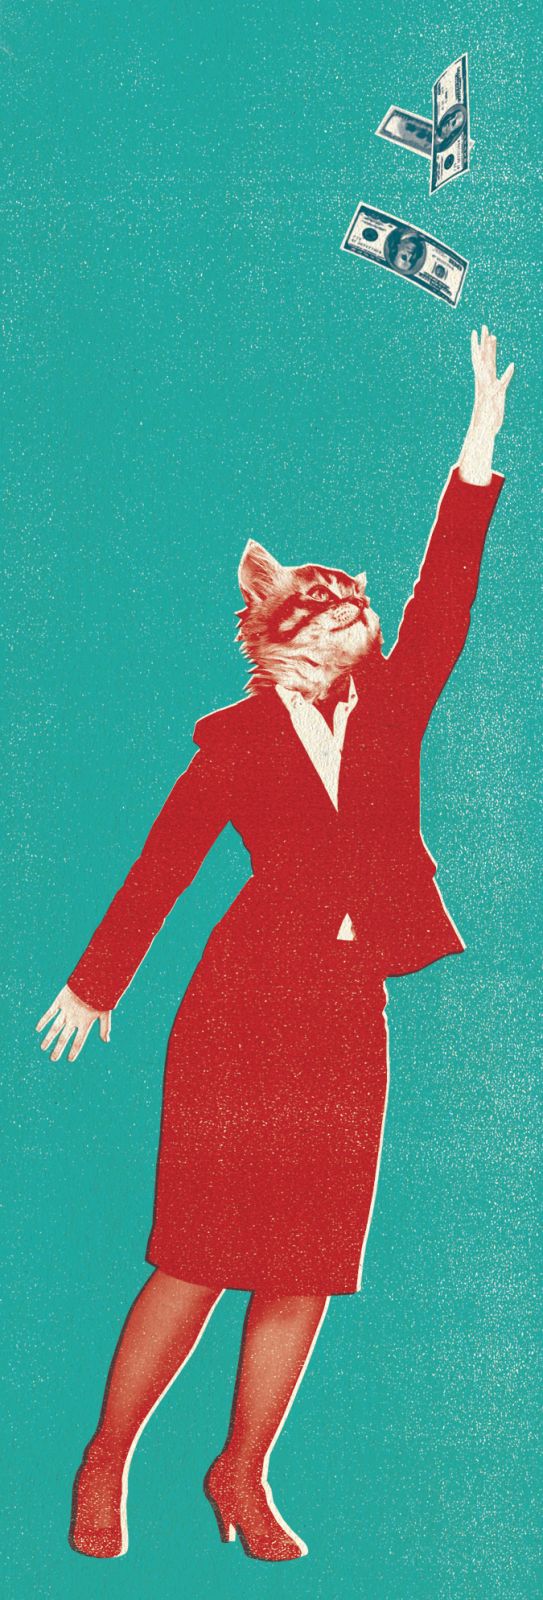 illustration of a cat reaching for money